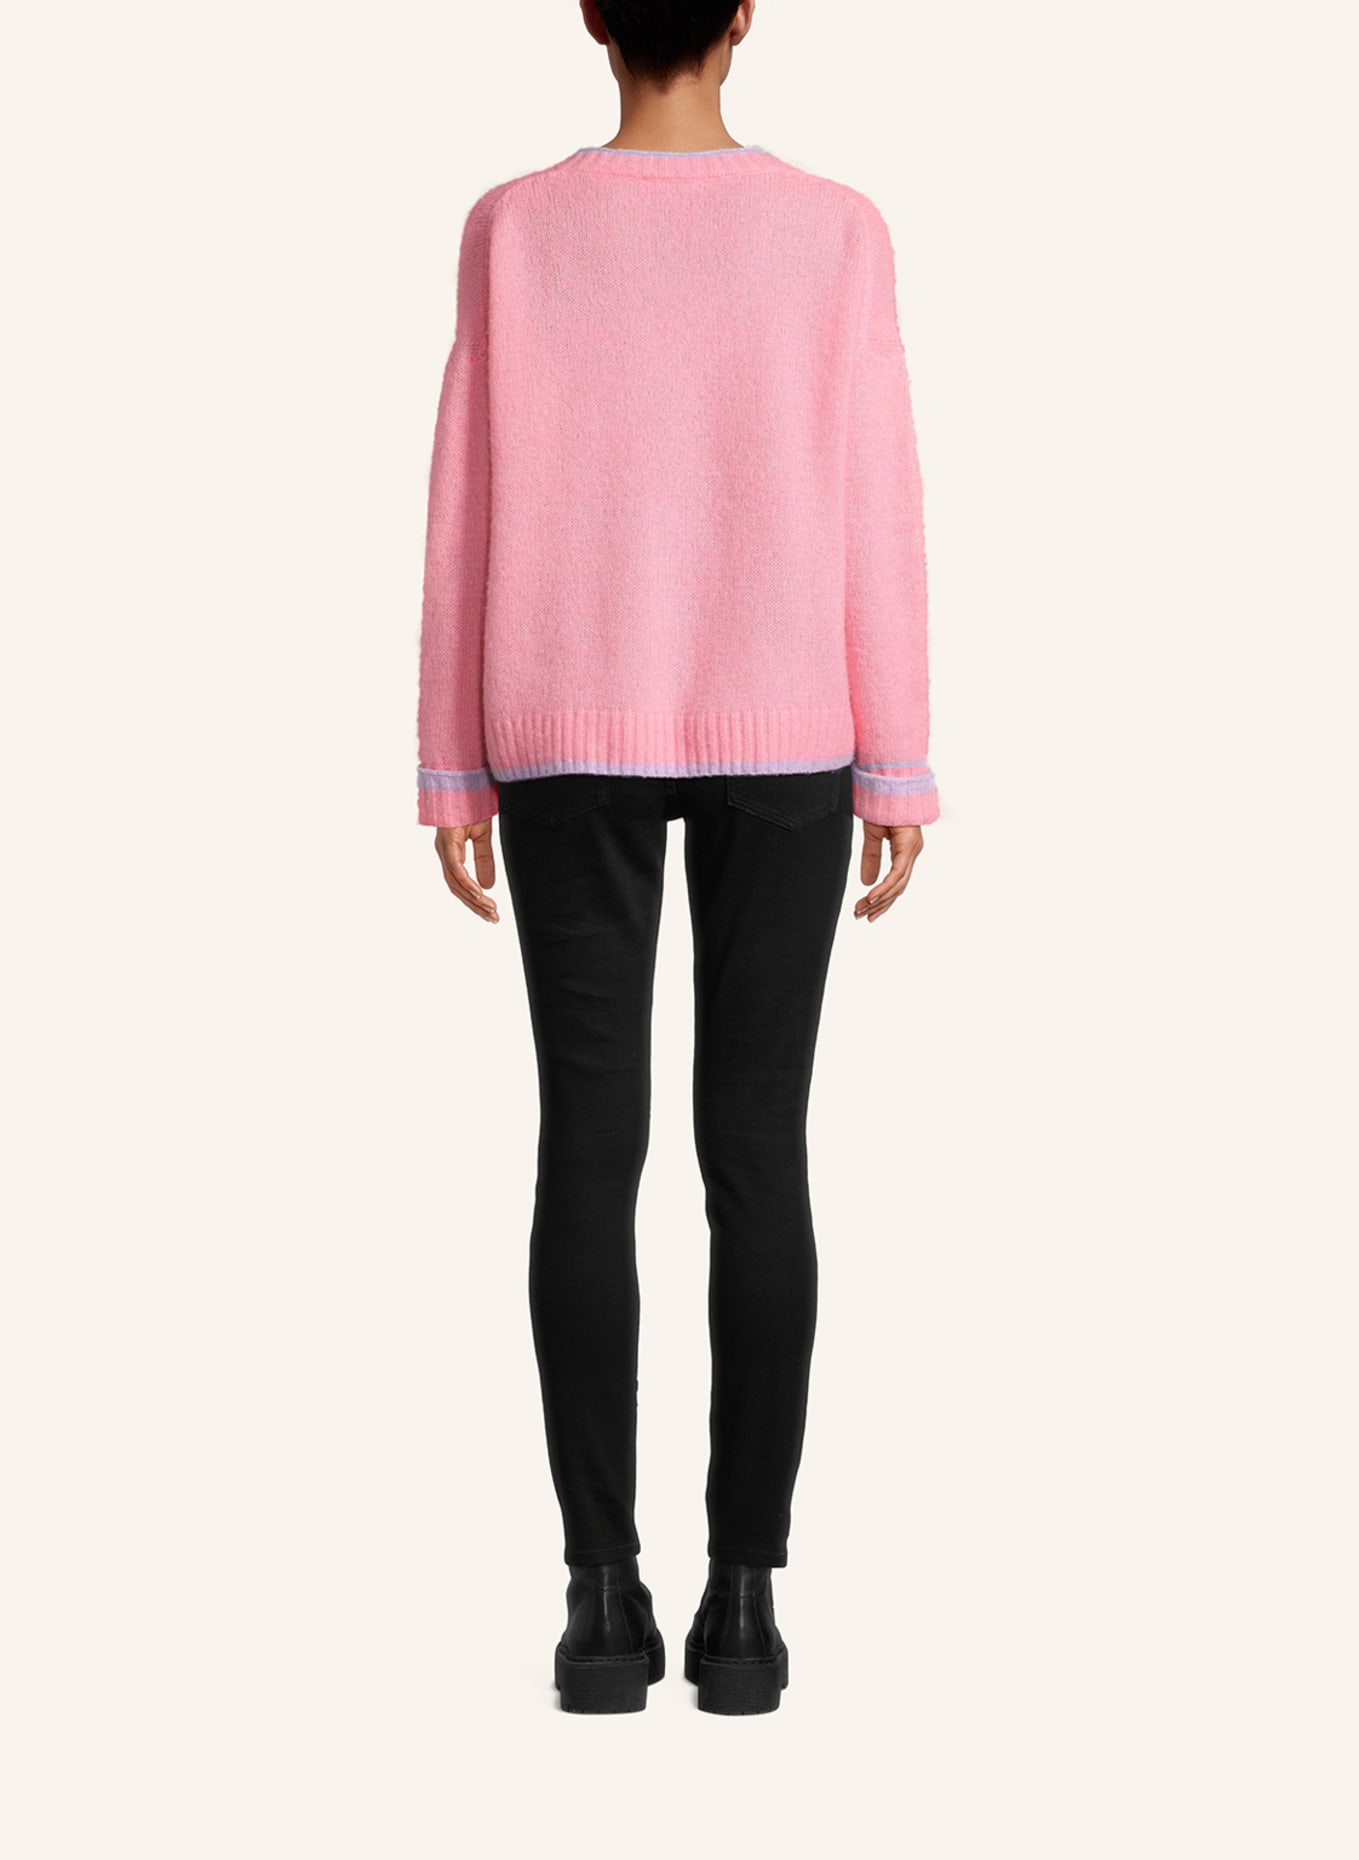 Princess GOES HOLLYWOOD Pullover mit Cashmere, Farbe: PINK (Bild 2)